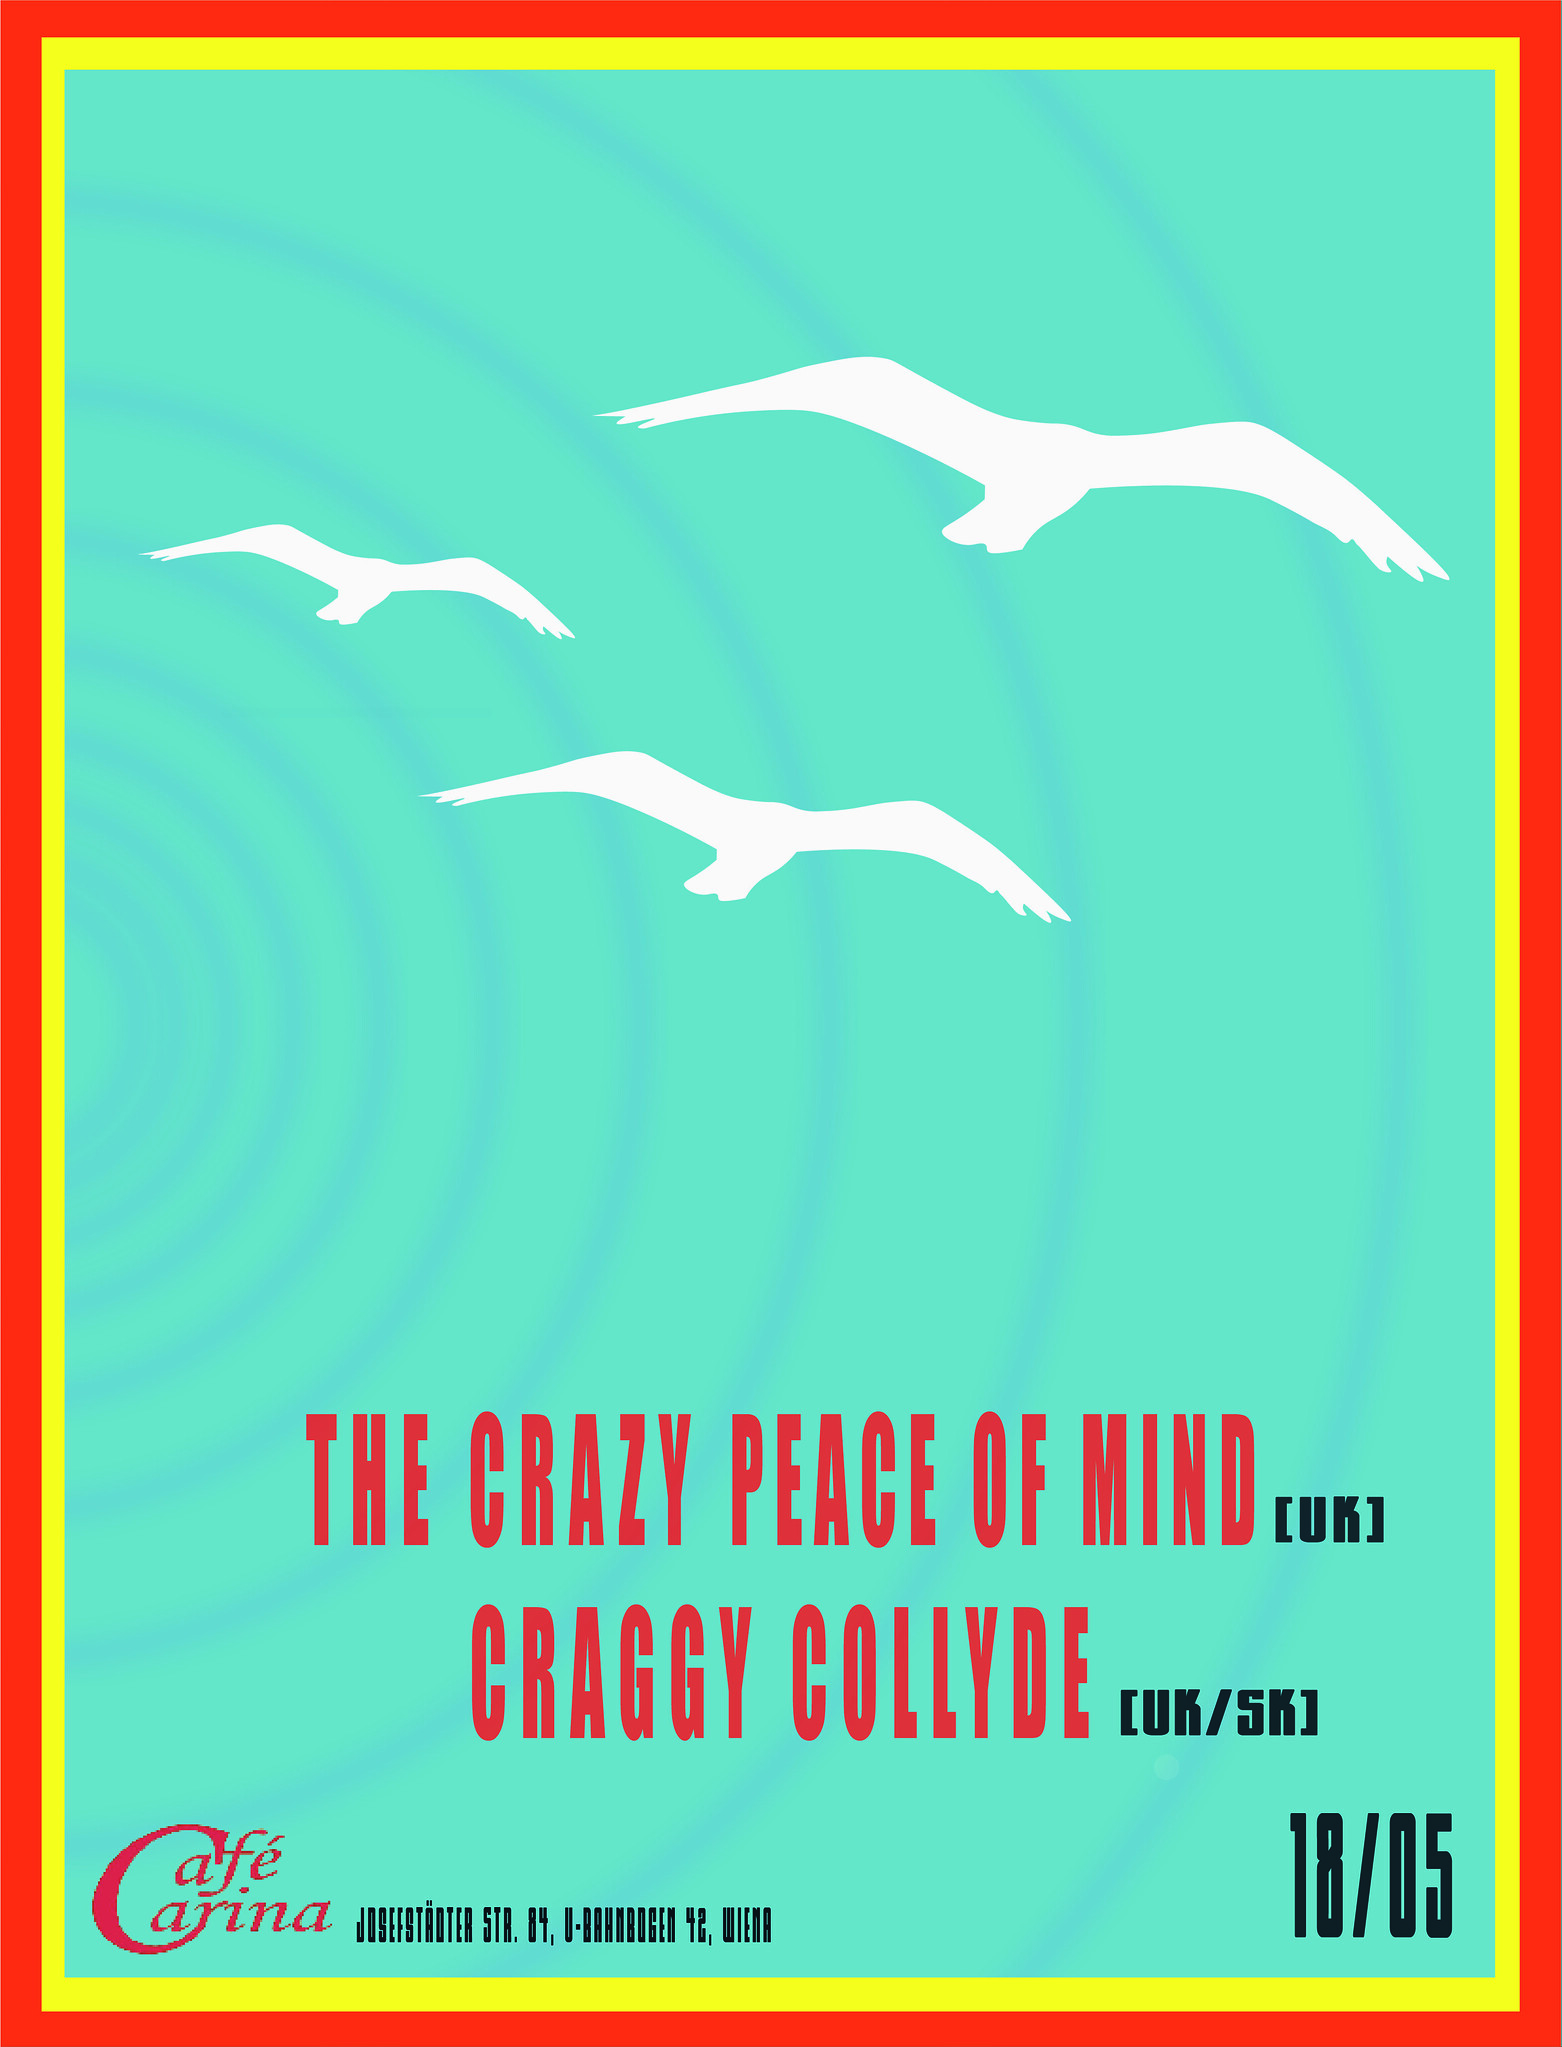 The Crazy Peace Of Mind (GB) / Craggy Collyde (SVK)